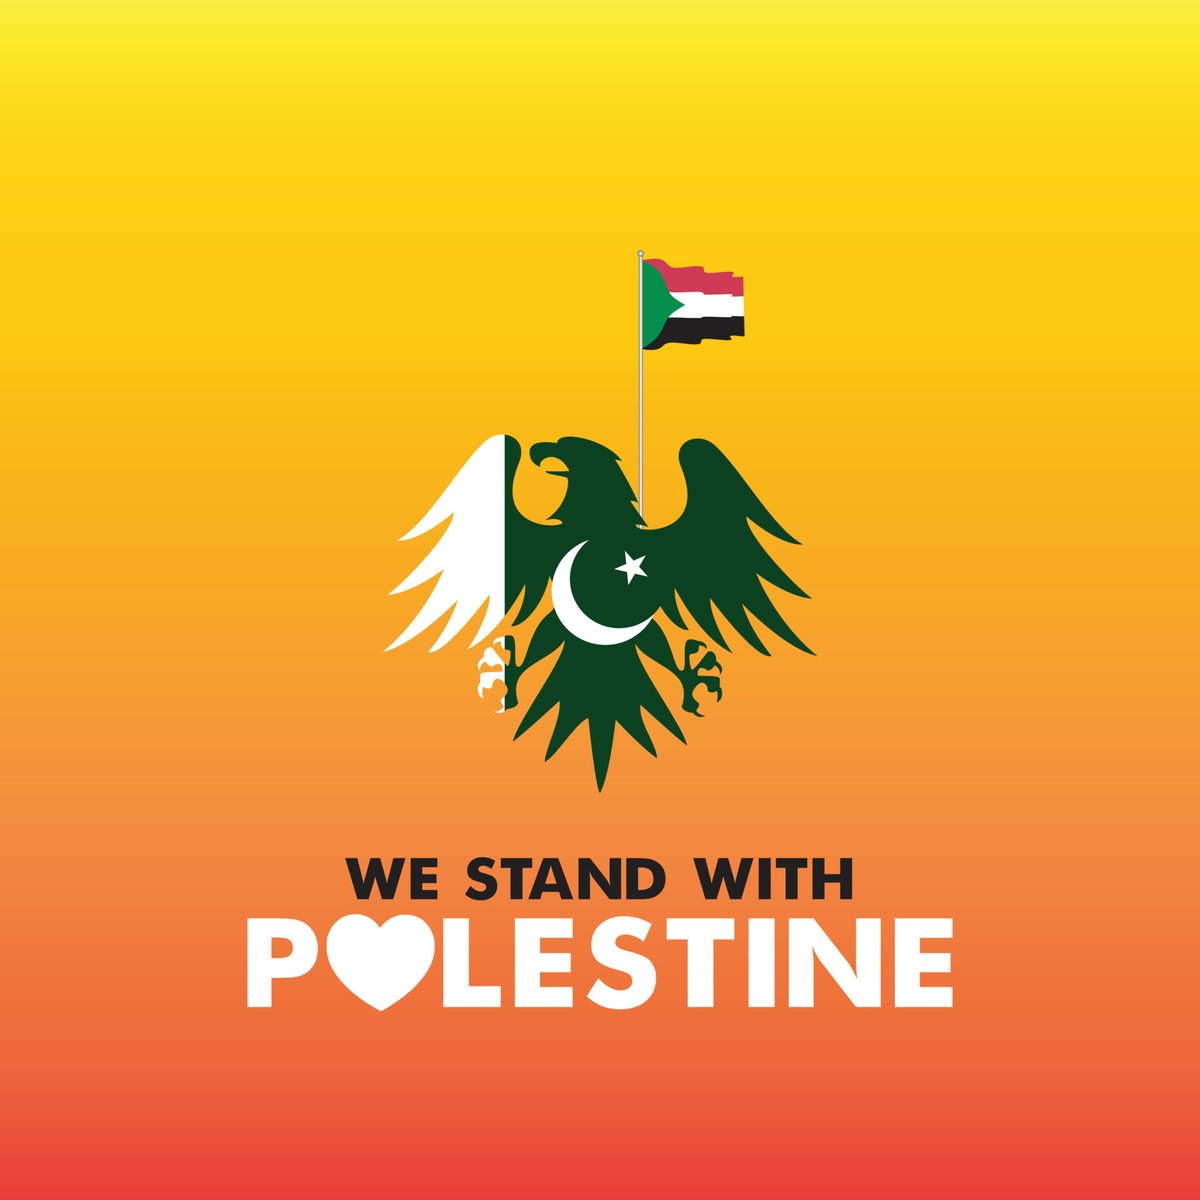 being a citizen Islamic republic of Pakistan, we are  strictly deplore Israel cruelty against victimice Palestine and salute to Hamas mujahidin of Palestine .
#standwithPalestine
#SavePalestine #savegaza
#saveJerusalem
  #FreePalastine #stopattacktoplastine